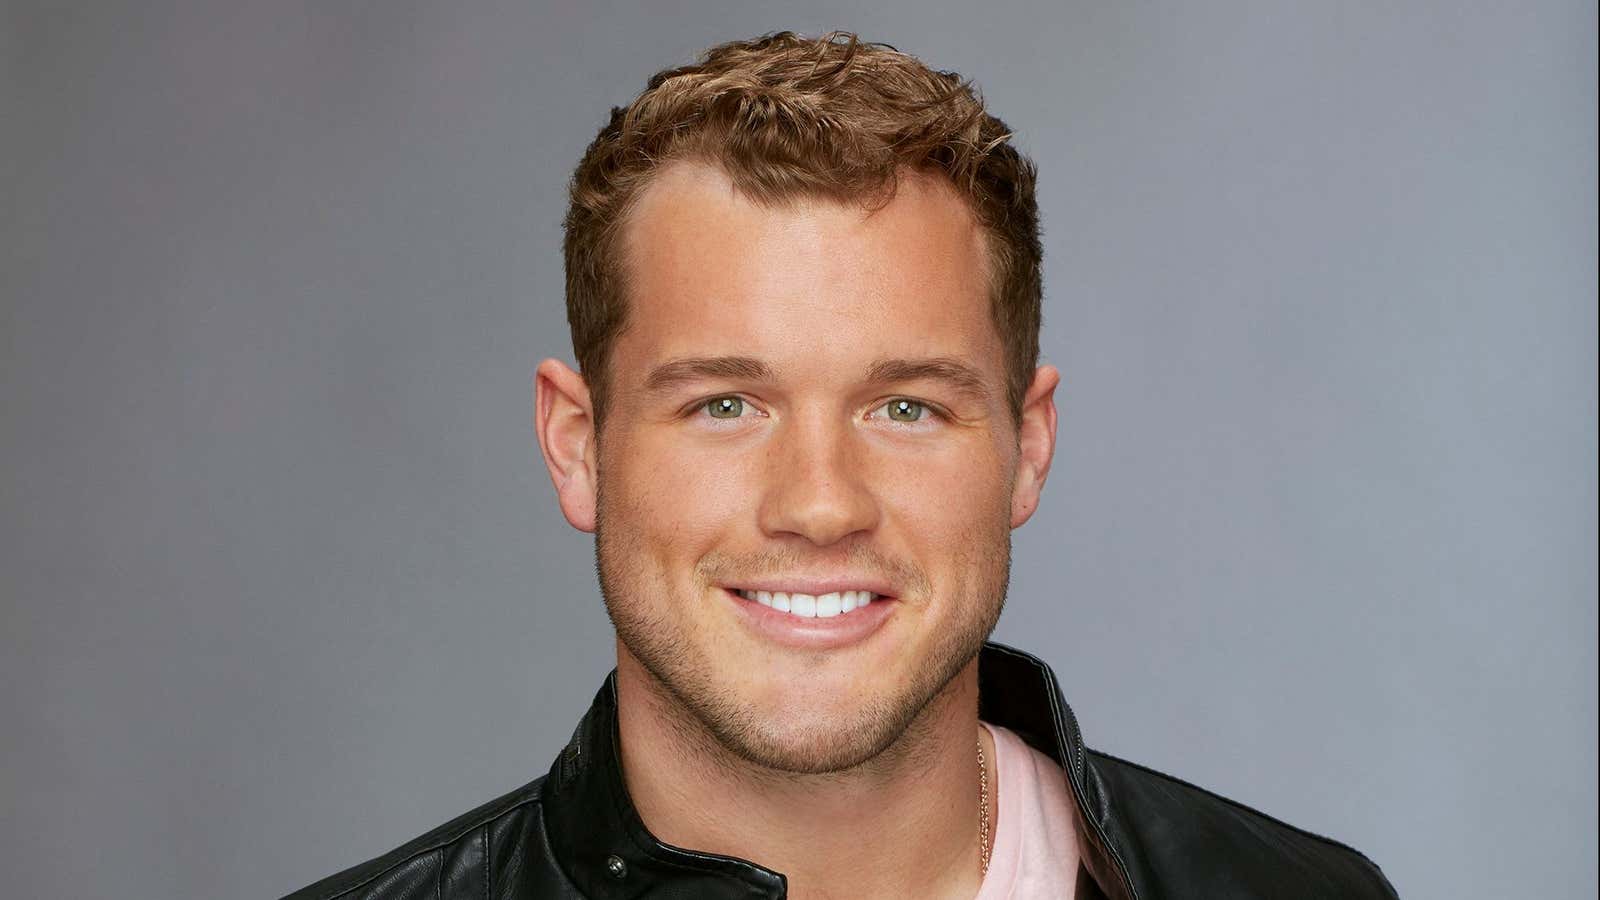 Who is The Bachelor franchise for?